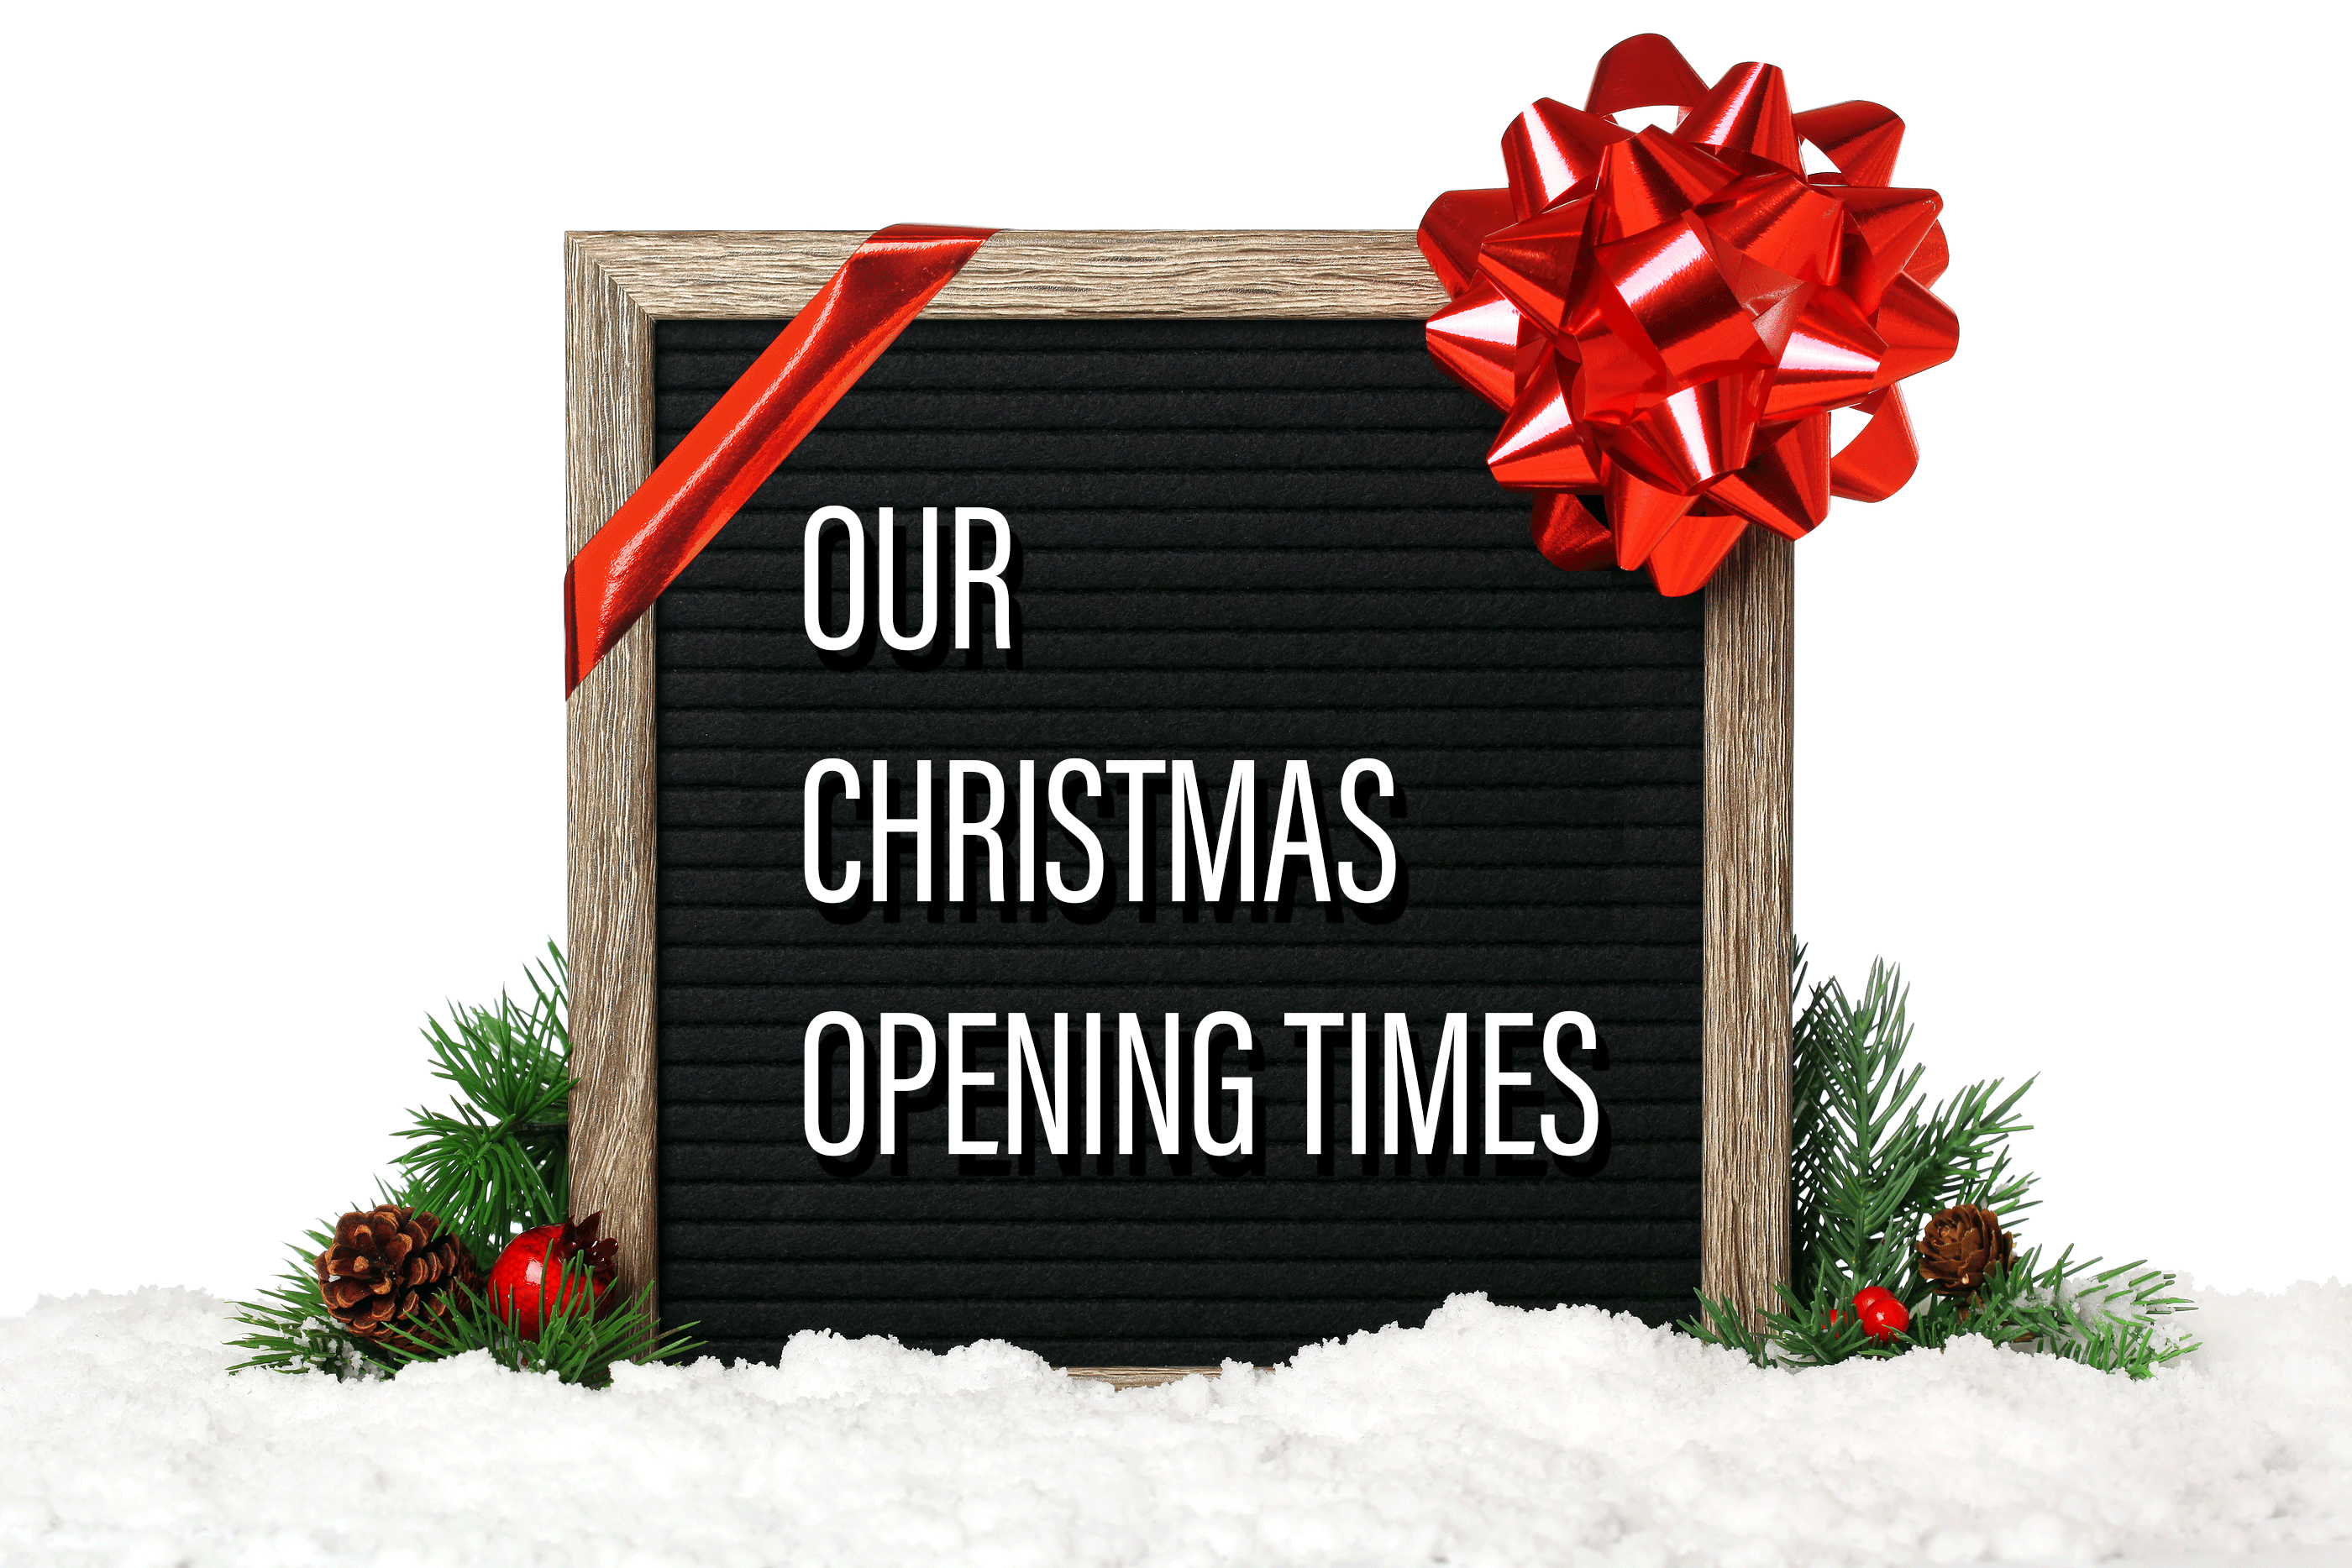 Christmas opening times sign